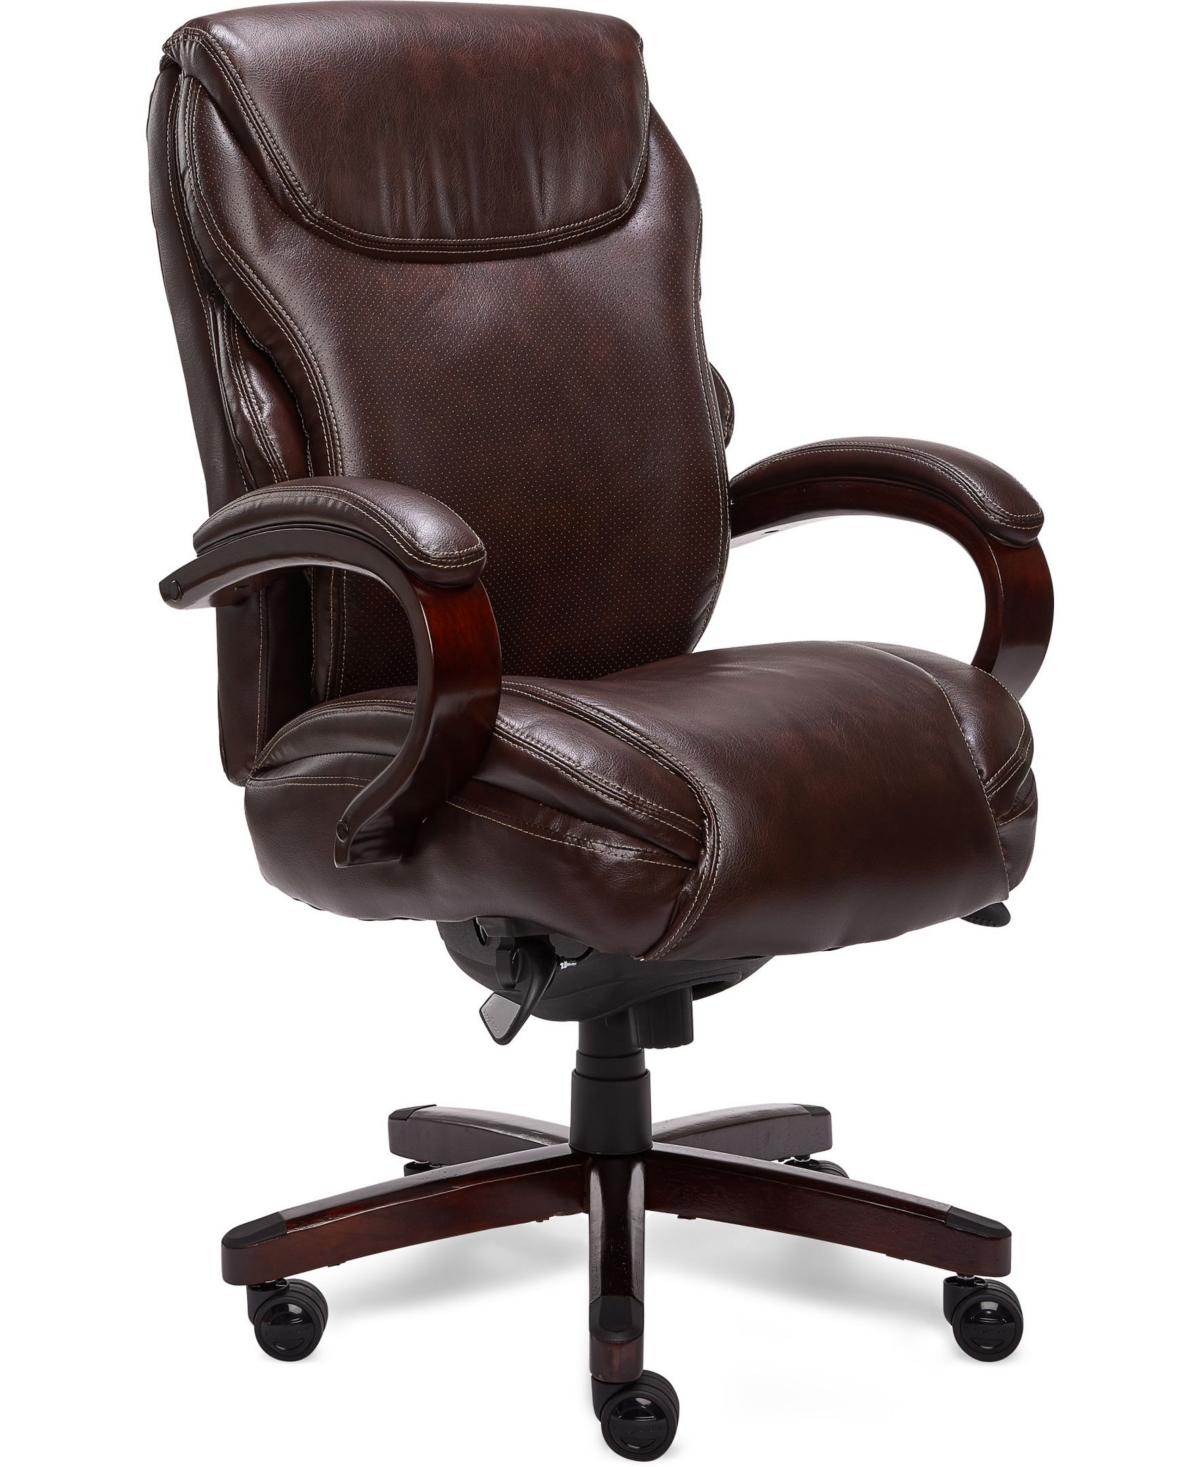 La-z-boy Hyland Executive Office Chair In Brown